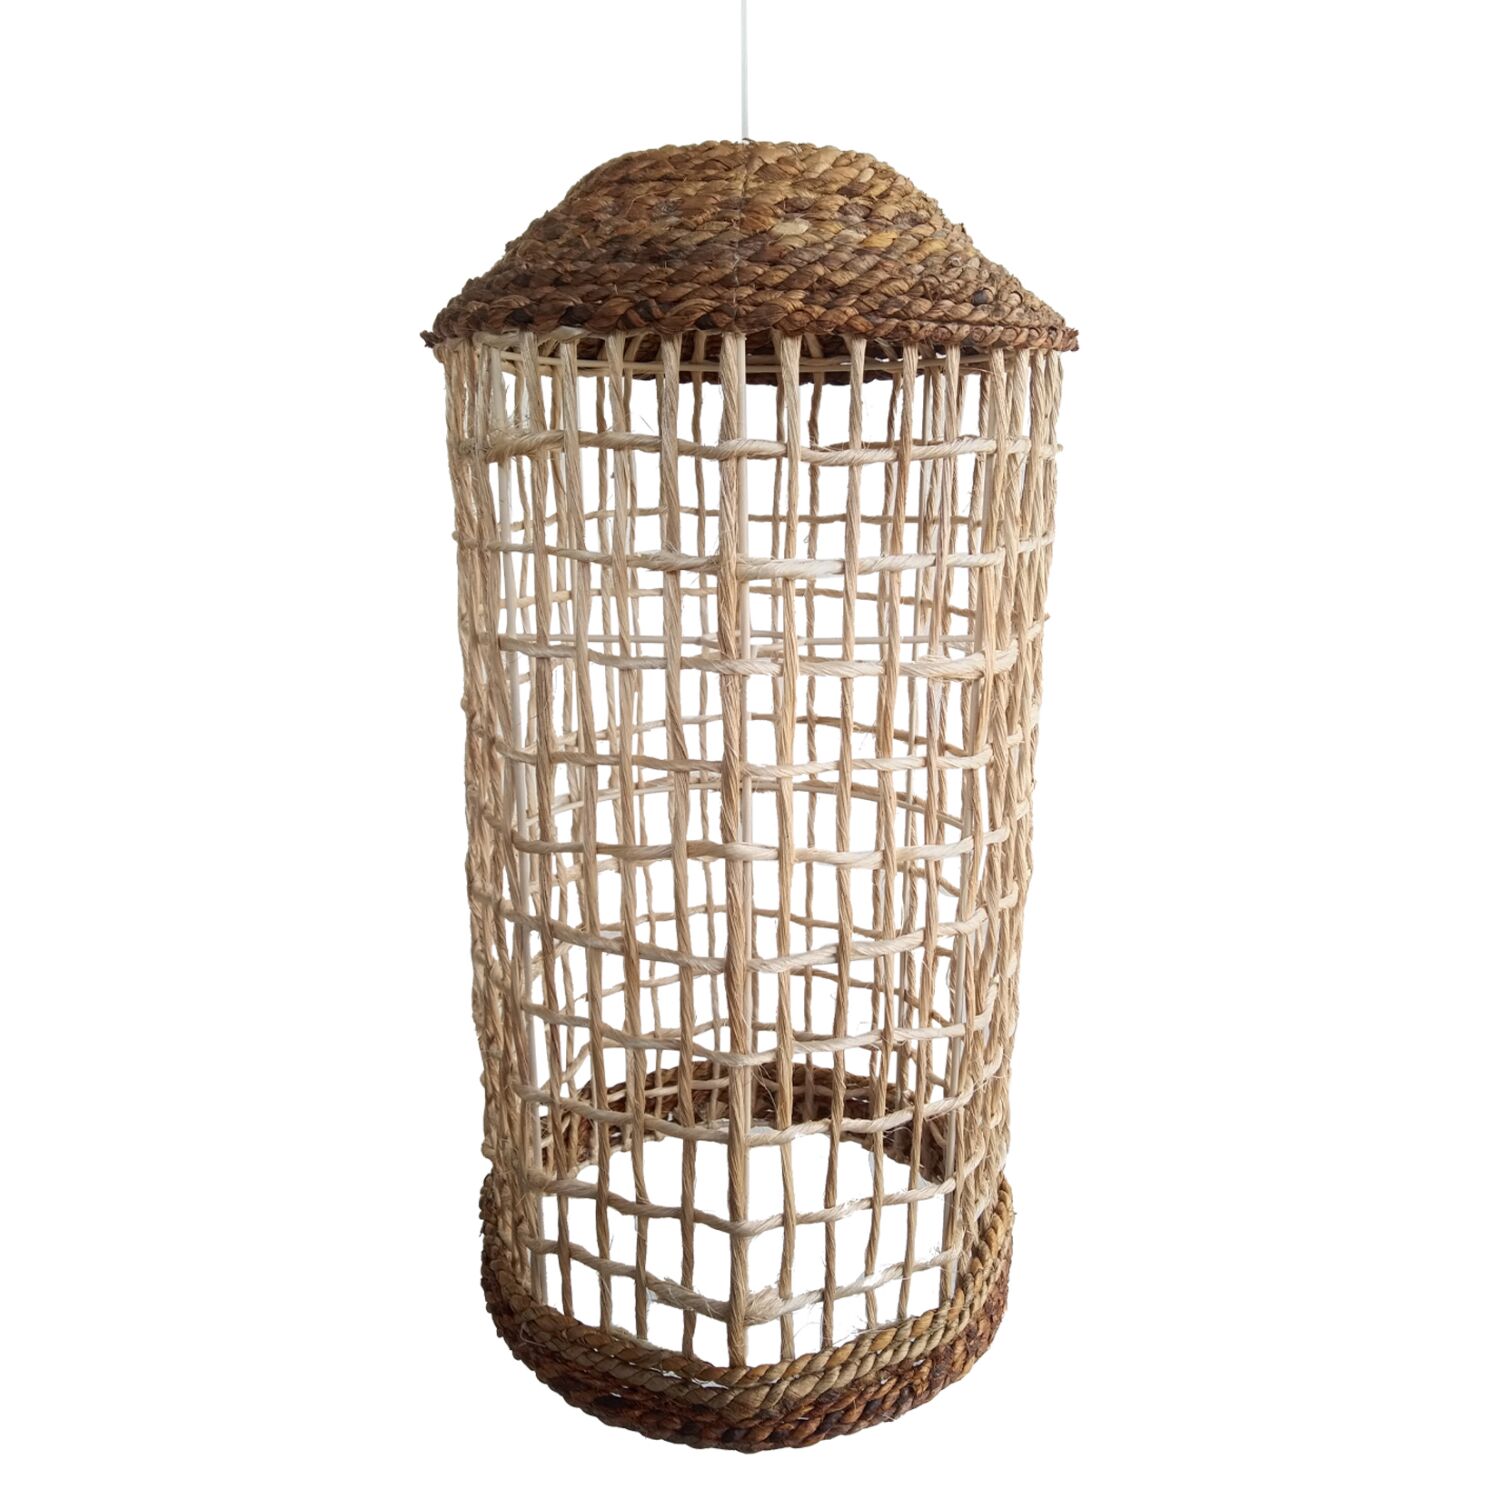 CEILING PENDANT OBLONG CYLINDRICAL CAP ABACA FIBERS IN NATURAL 21x21x43-80Hcm.HM7768